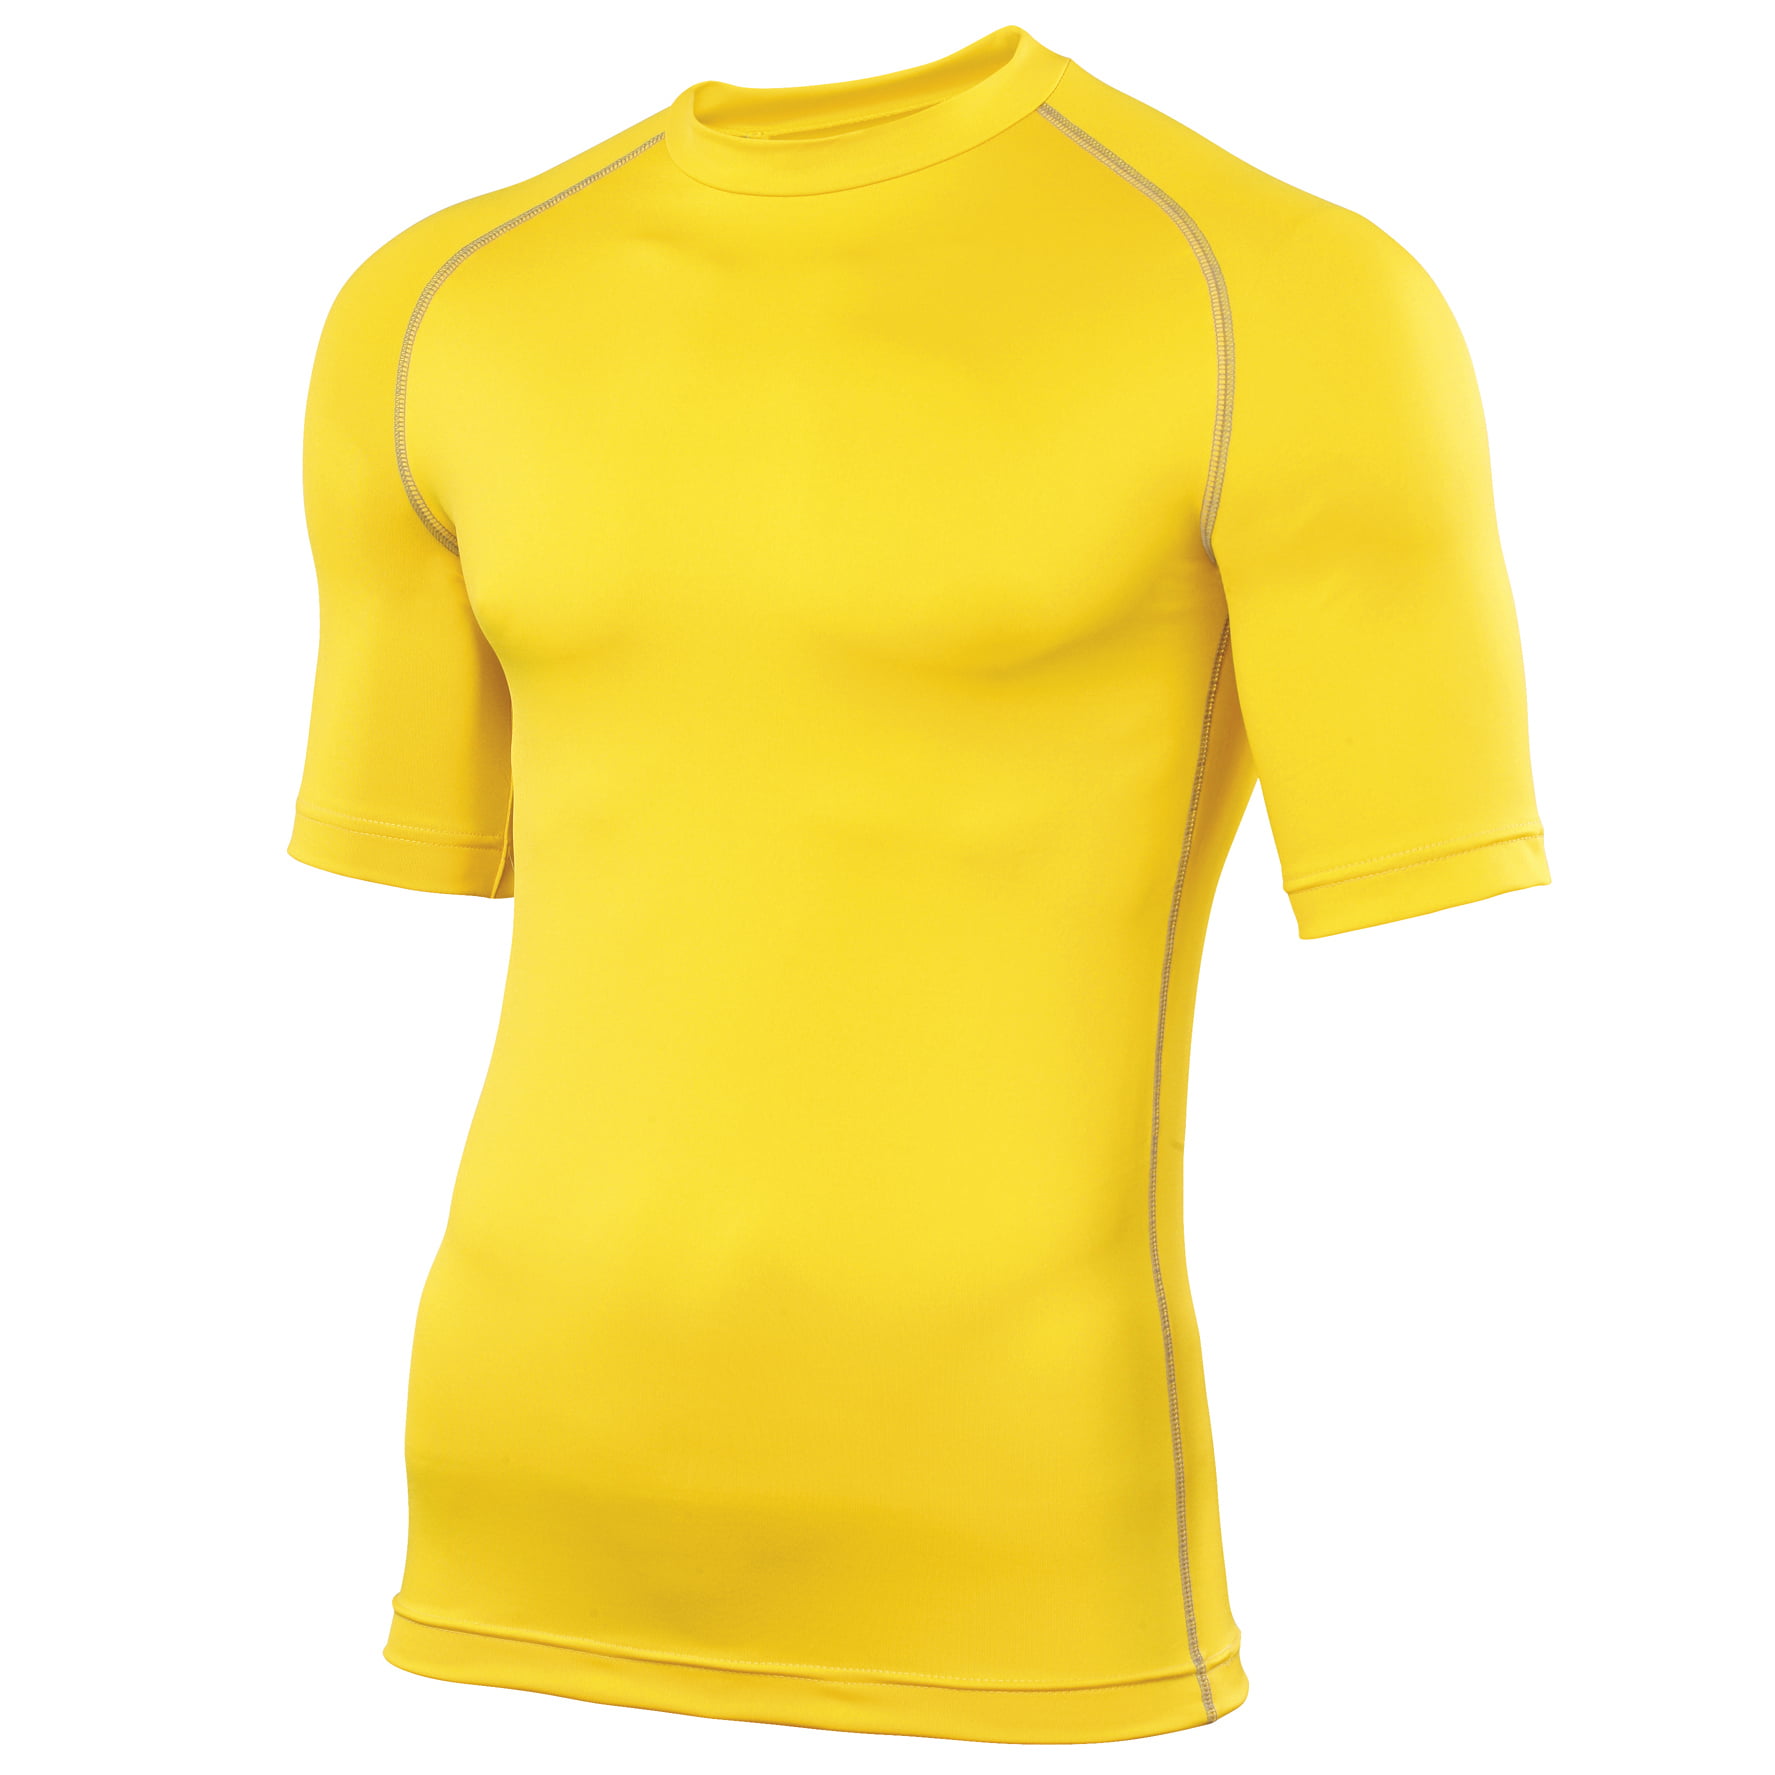 Rhino Base Layer Top Mens/Womens Short Sleeve Compression For Sports/Gym/Rugby 